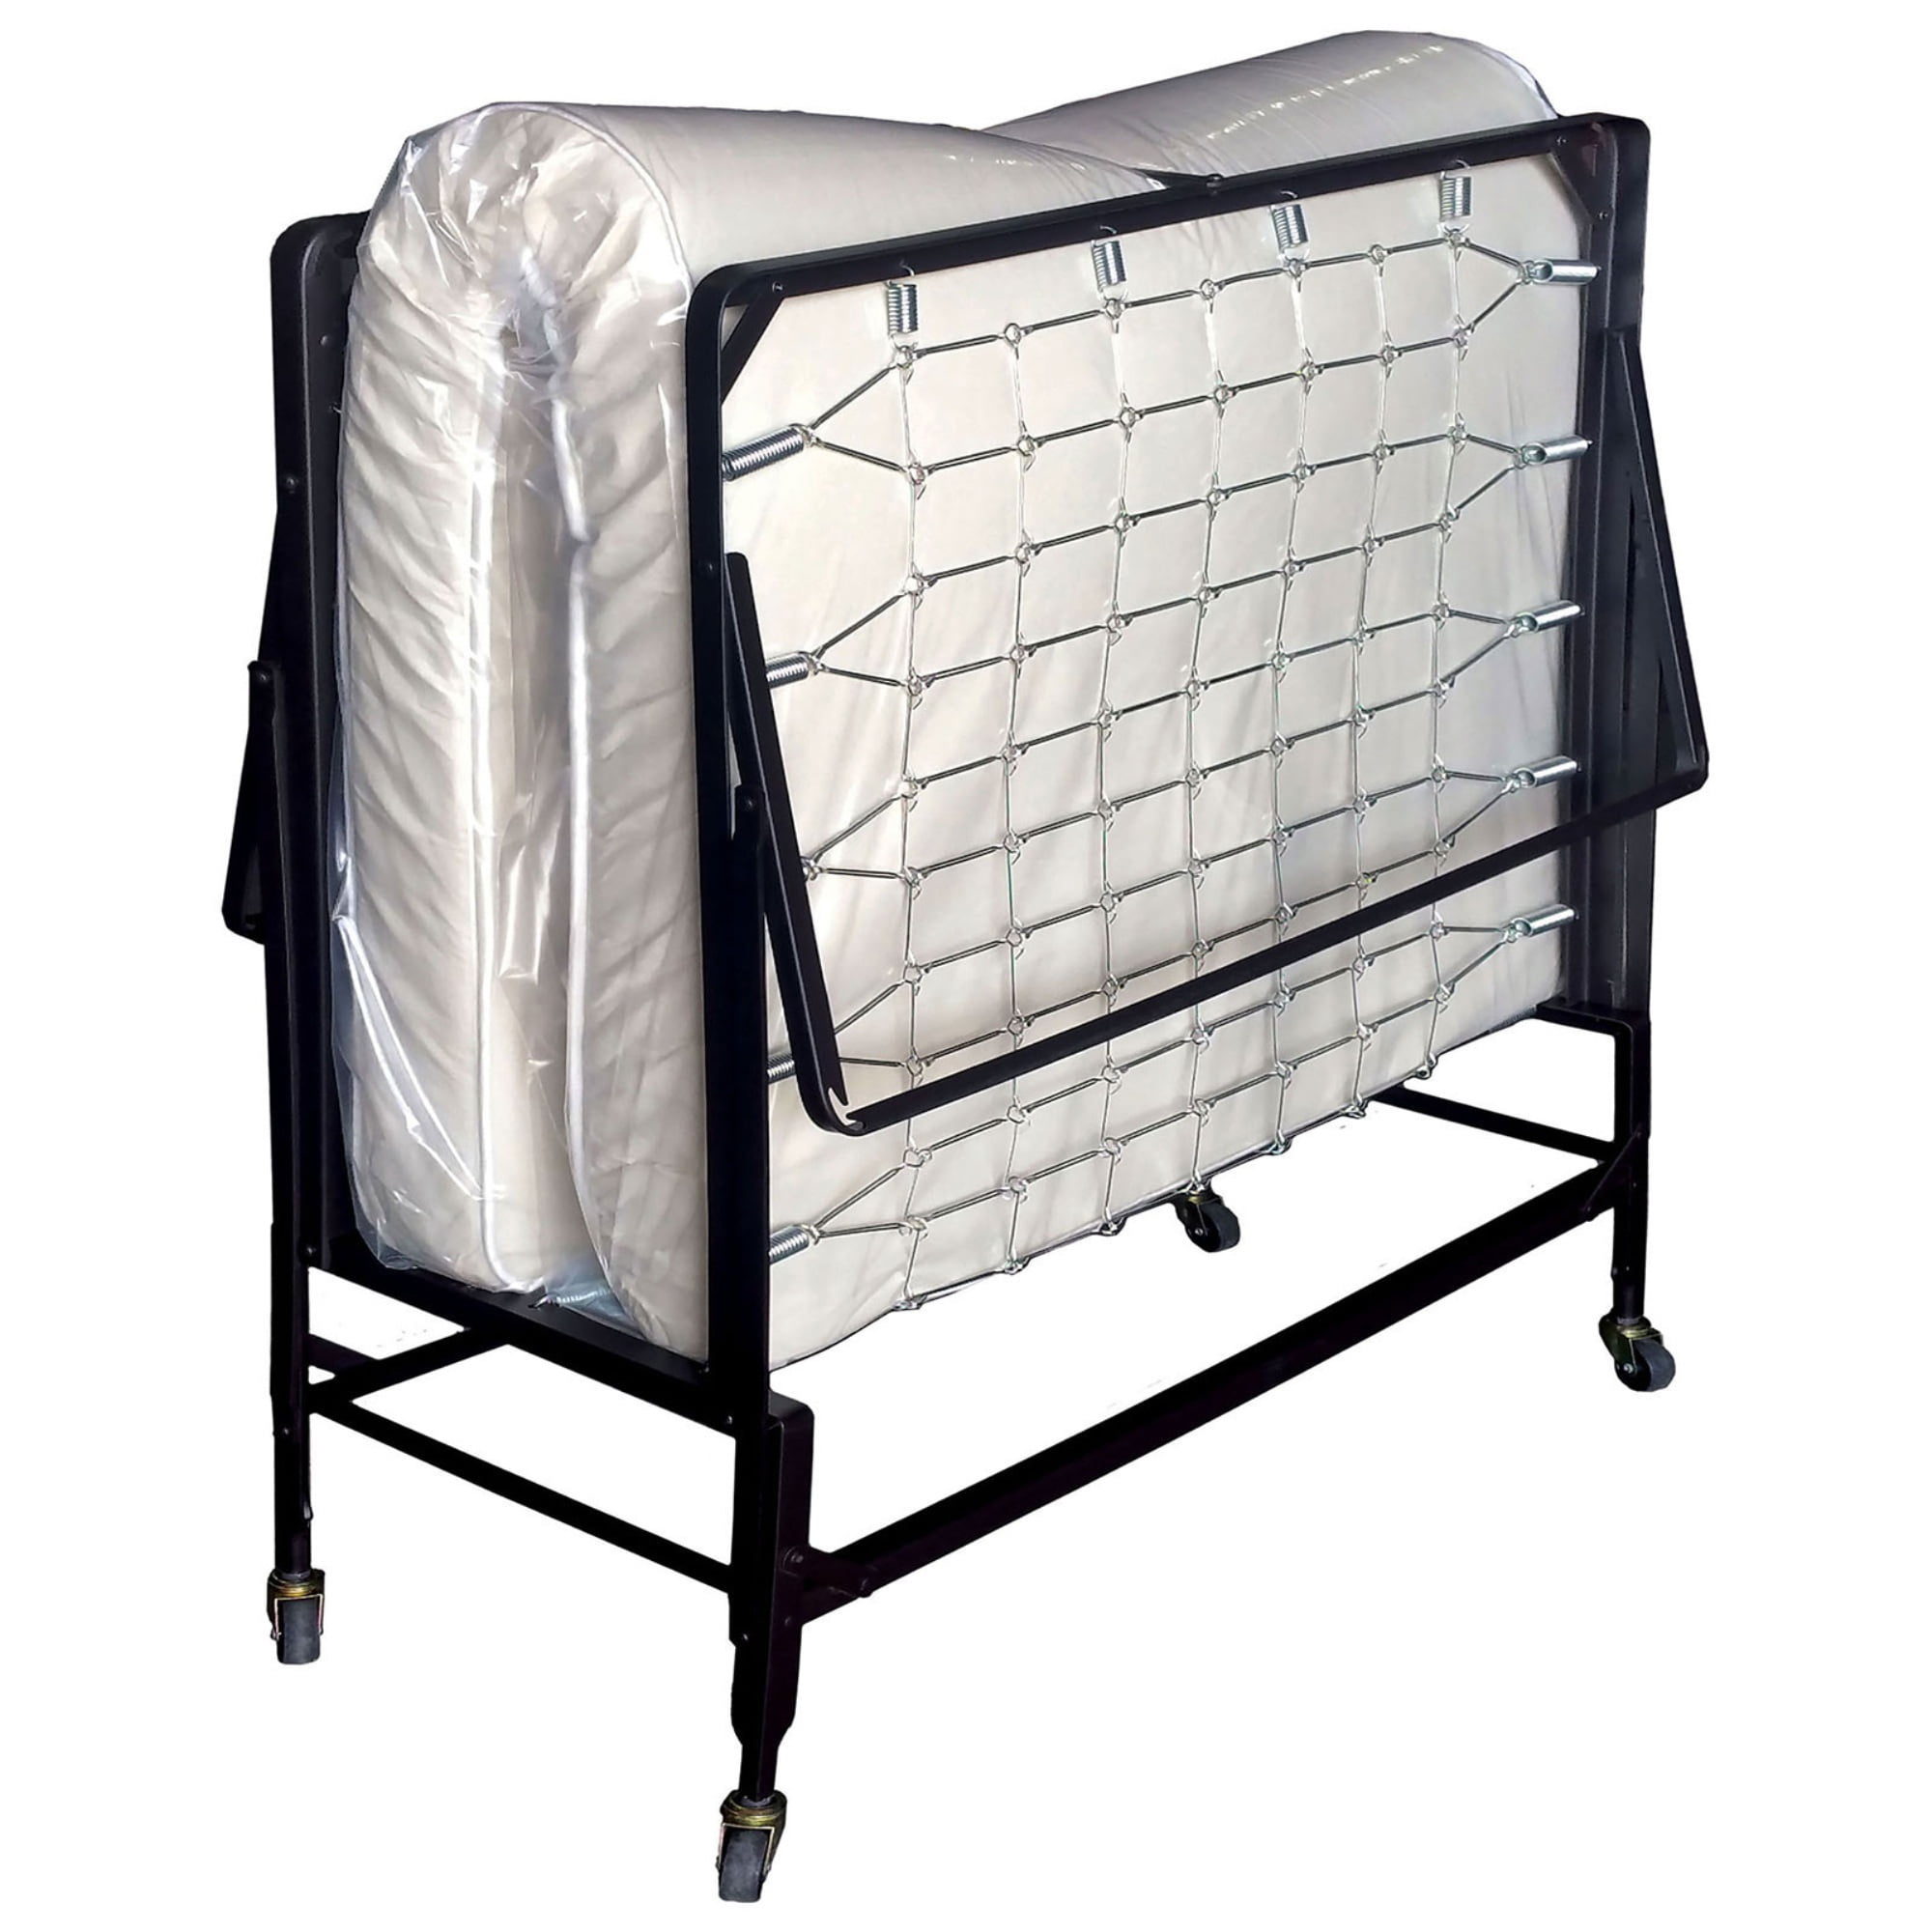 Metal Rollaway Folding Bed with 39 Inch Mattress and Casters, Black